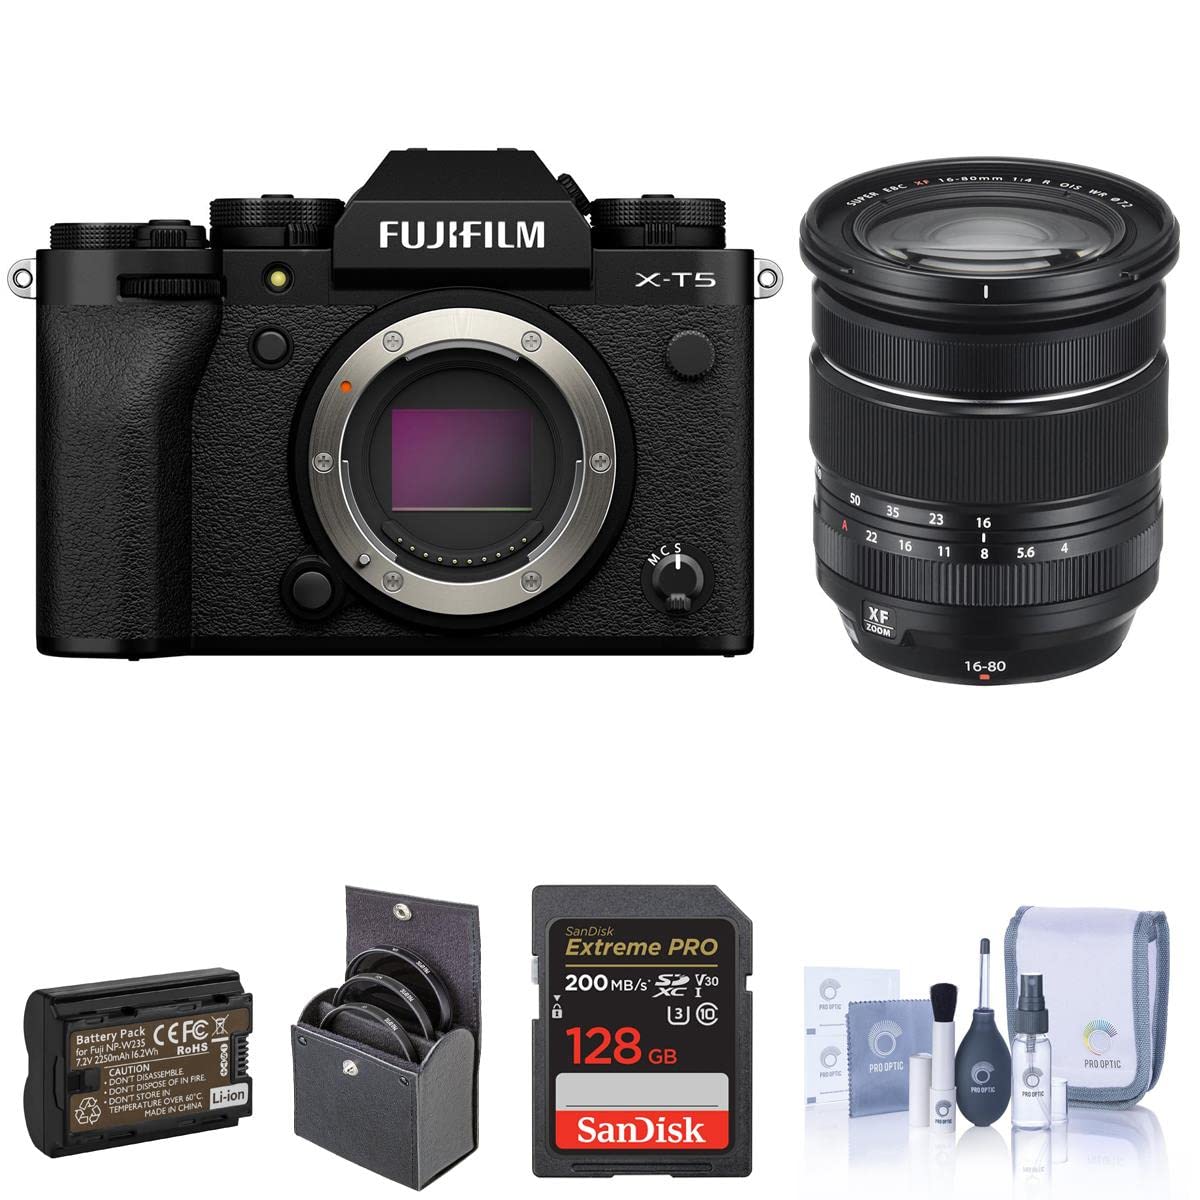 Fujifilm X-T5 Mirrorless Camera, Black with XF 16-80mm f/4.0 R OIS WR Lens, 128GB SD Card, Extra Battery, 72mm Filter Kit, Cleaning Kit